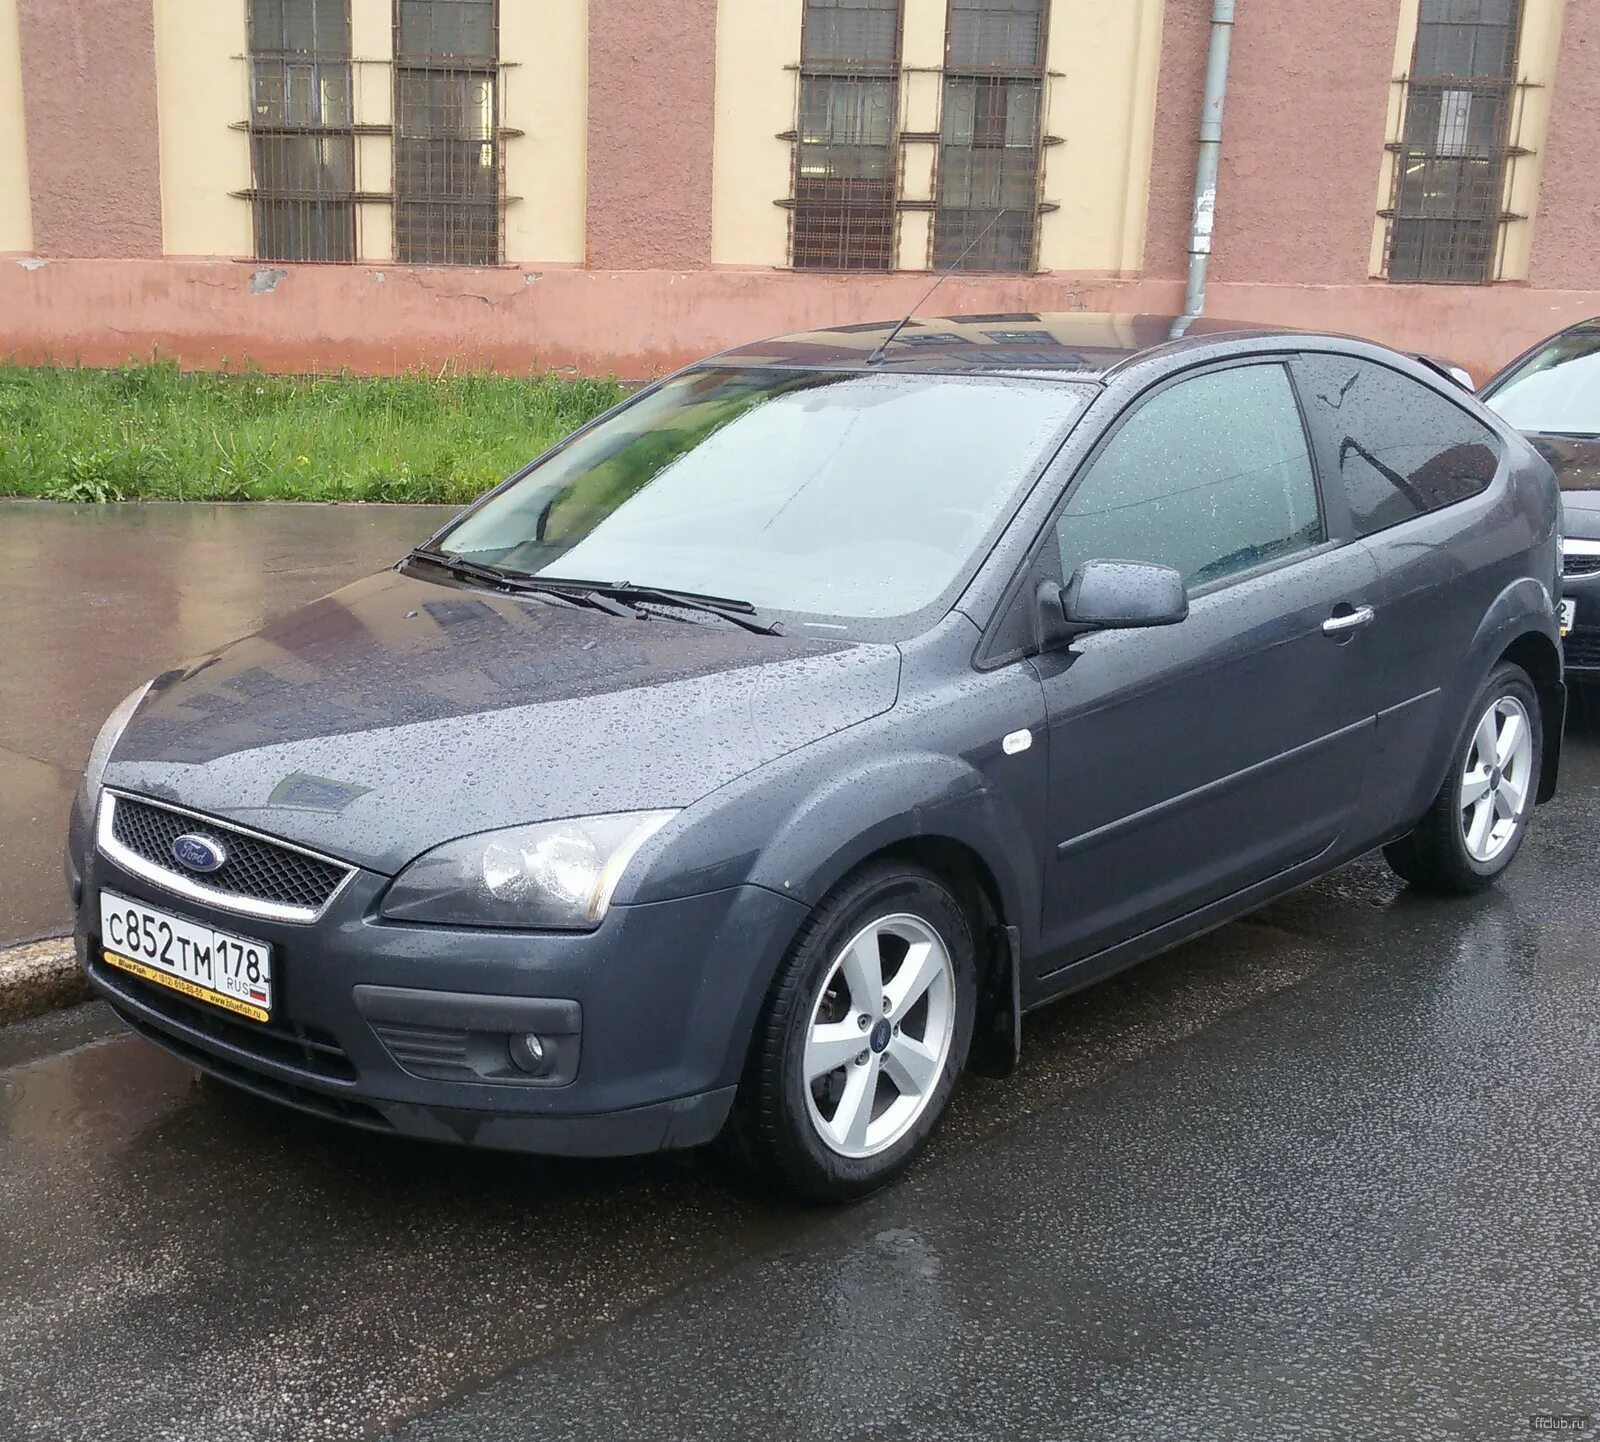 Ford Focus 2 2007. Форд фокус 2 2006. Форд фокус 2 хэтчбек 2007 2.0. Форд фокус 2 хэтчбек 2007 2л. Форд фокус 2 хэтчбек 2.0